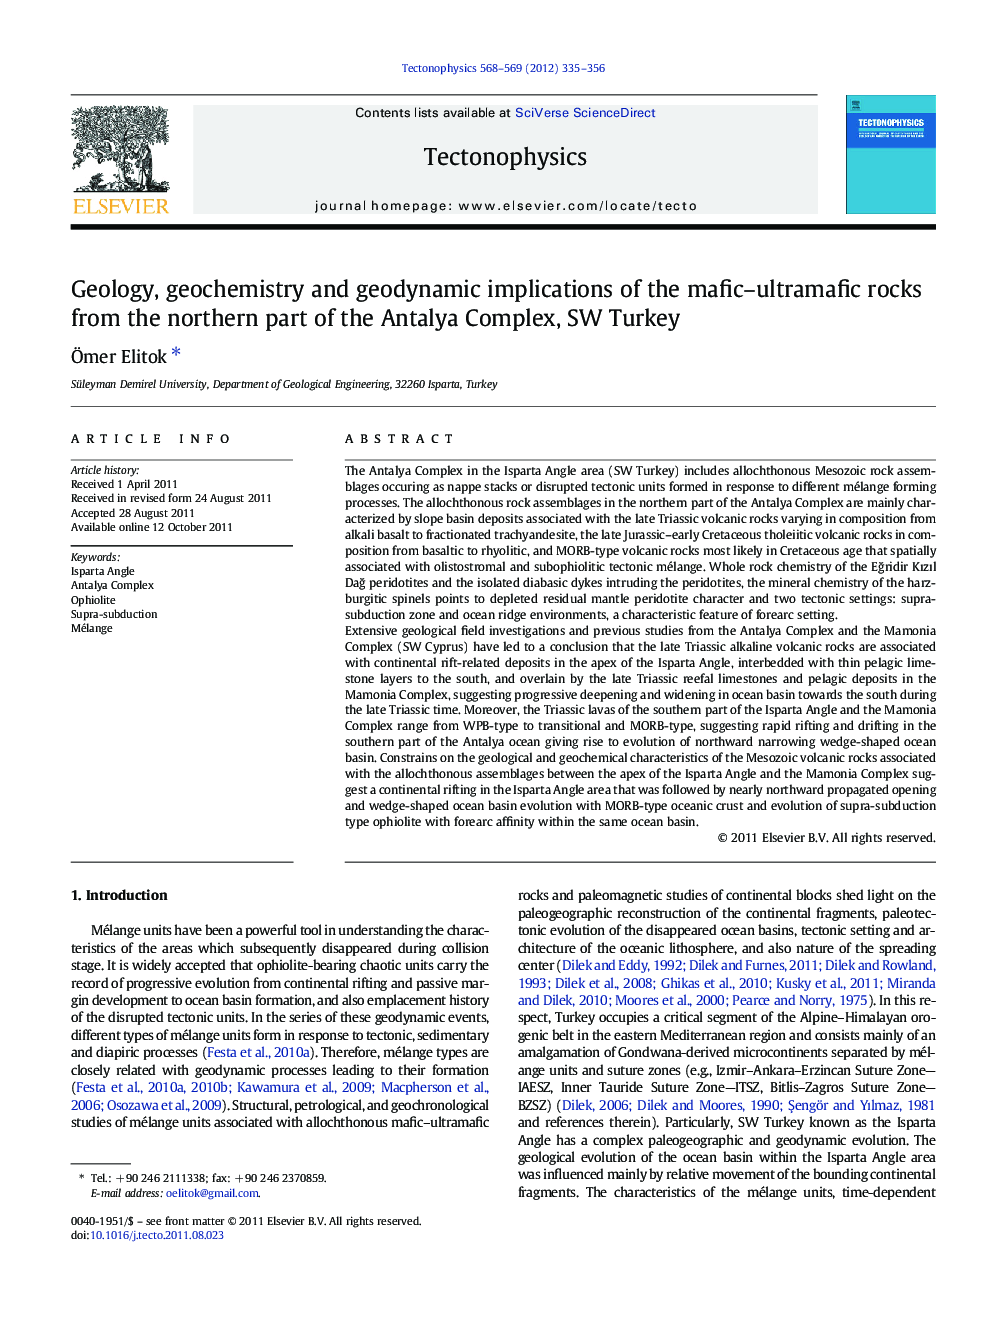 Geology, geochemistry and geodynamic implications of the mafic–ultramafic rocks from the northern part of the Antalya Complex, SW Turkey